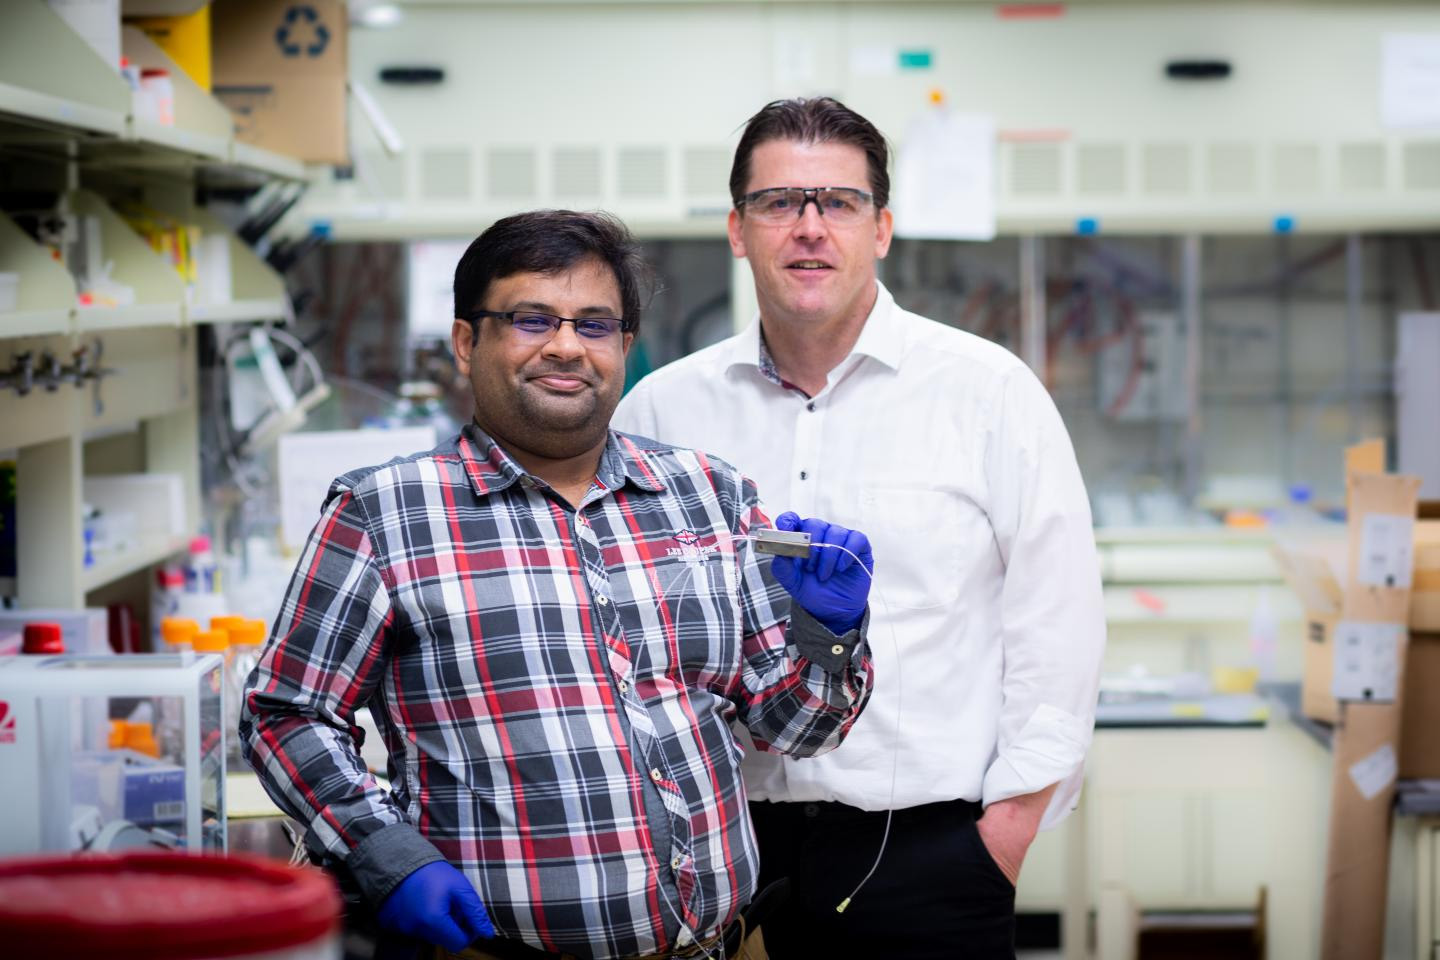 Graduate student Saket Bhargava (left) and Chemical and Biomolecular Engineering Professor and Department Head Paul Kenis (right) report reducing the energy required for CO2 electrolysis by more than 60% in a flow electrolyzer using magnetism.